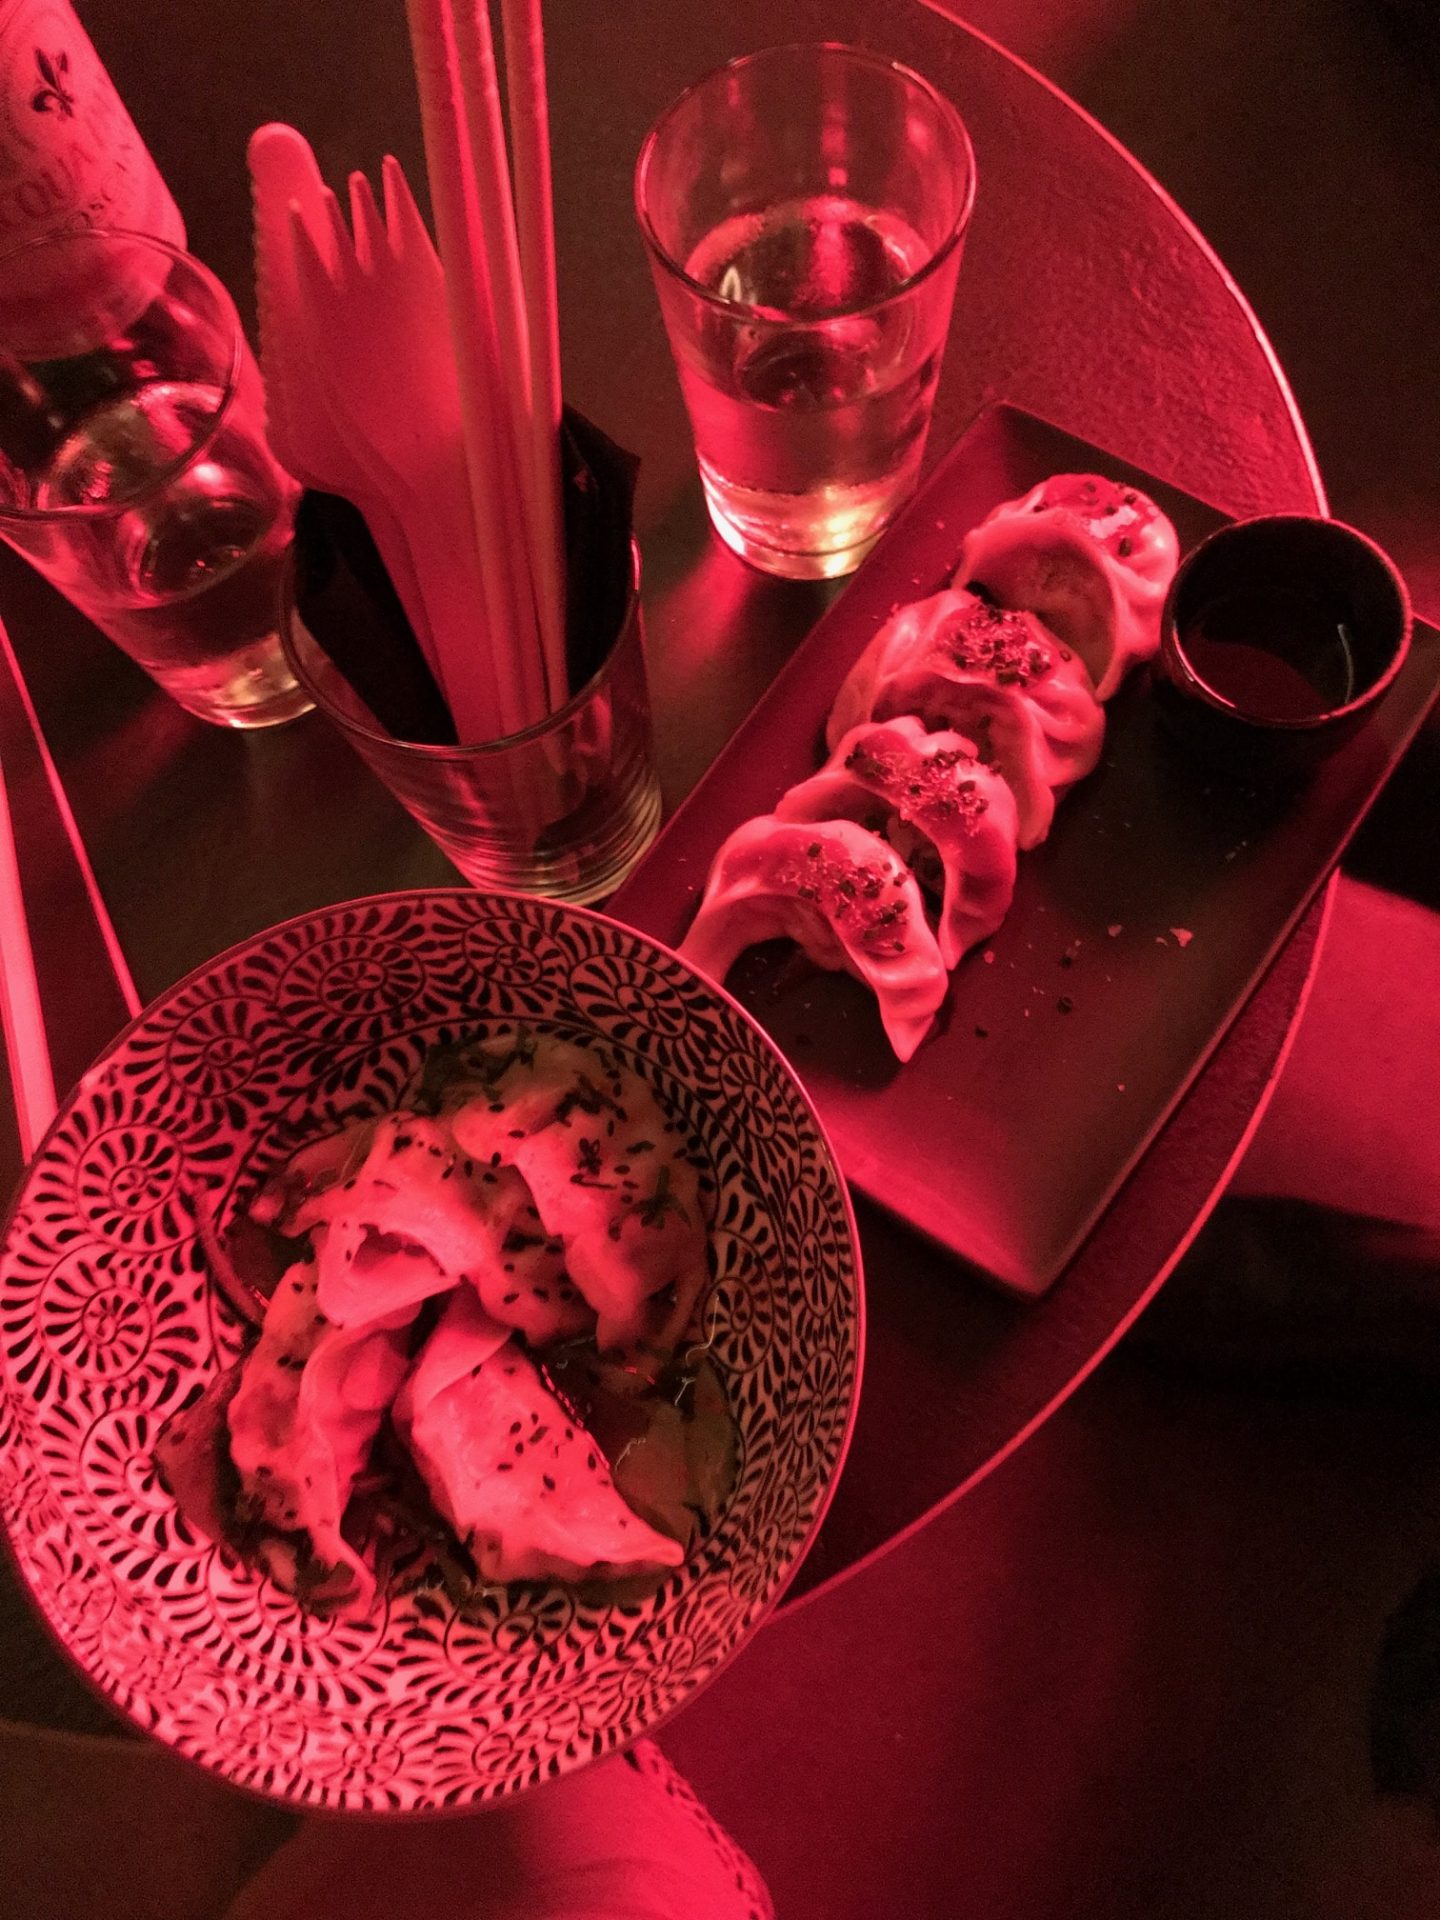 drink kong rome food on table in red light